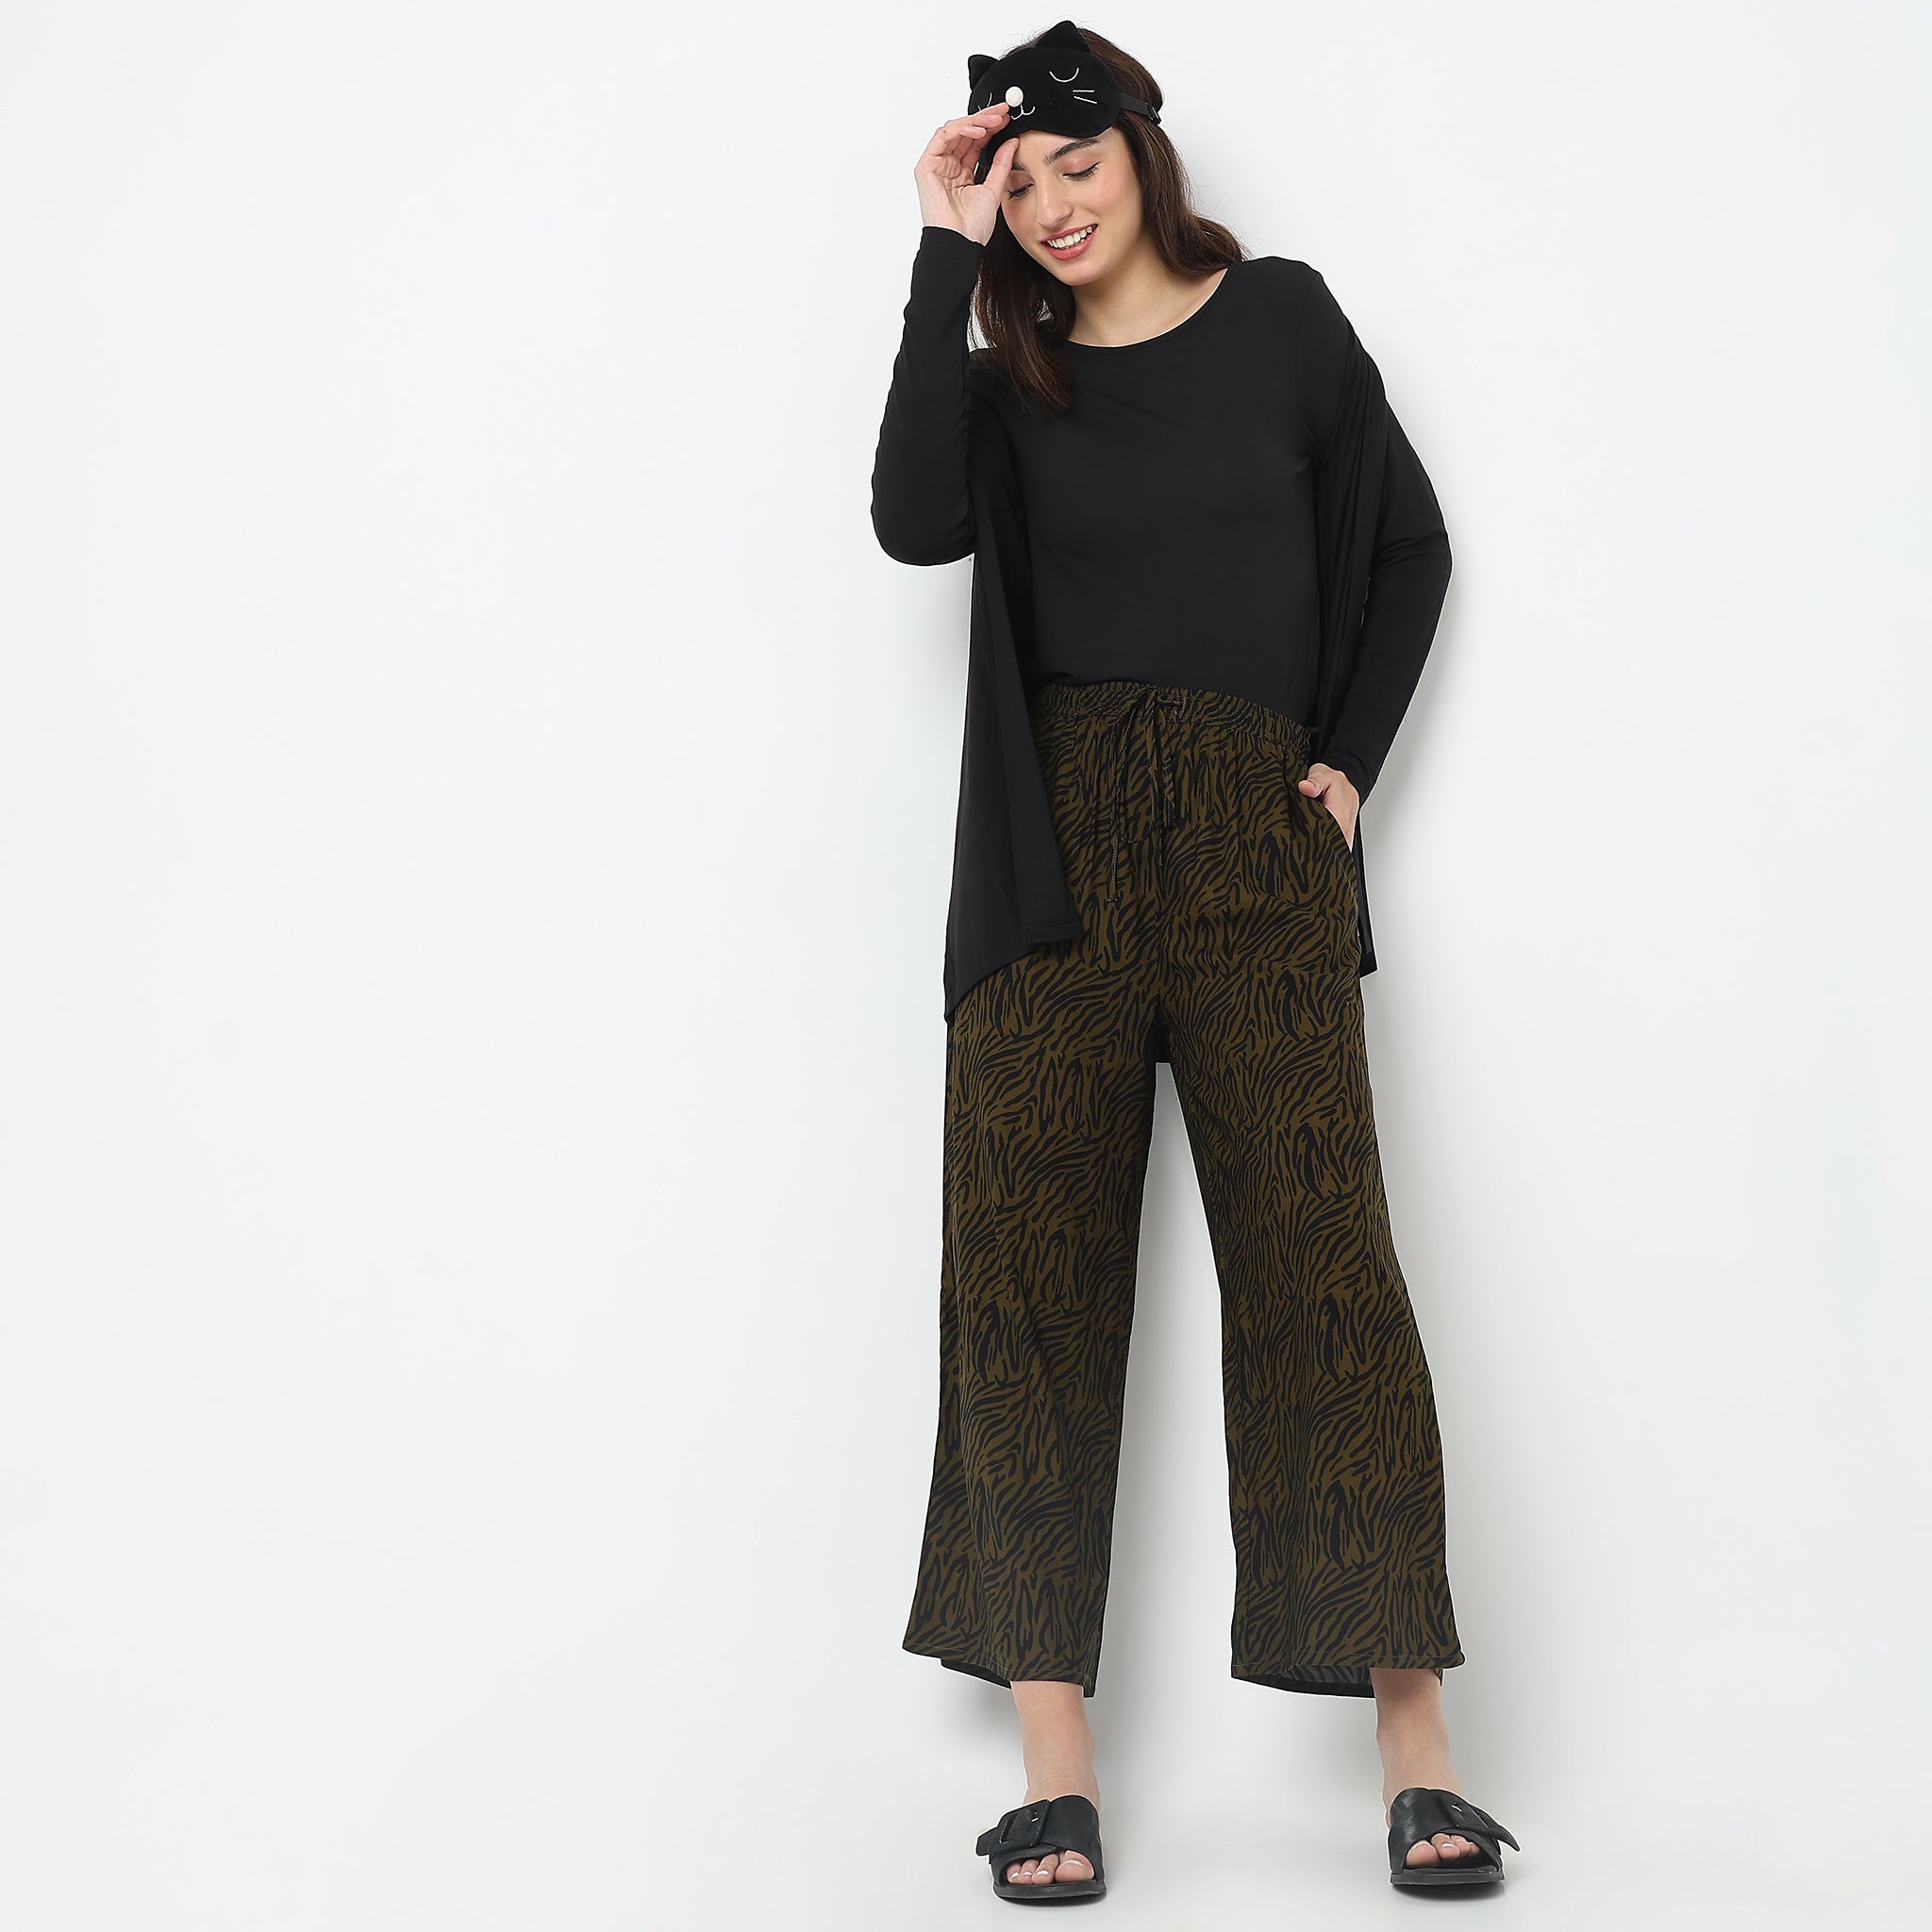 Buy Gold Solid Palazzos Online - Shop for W